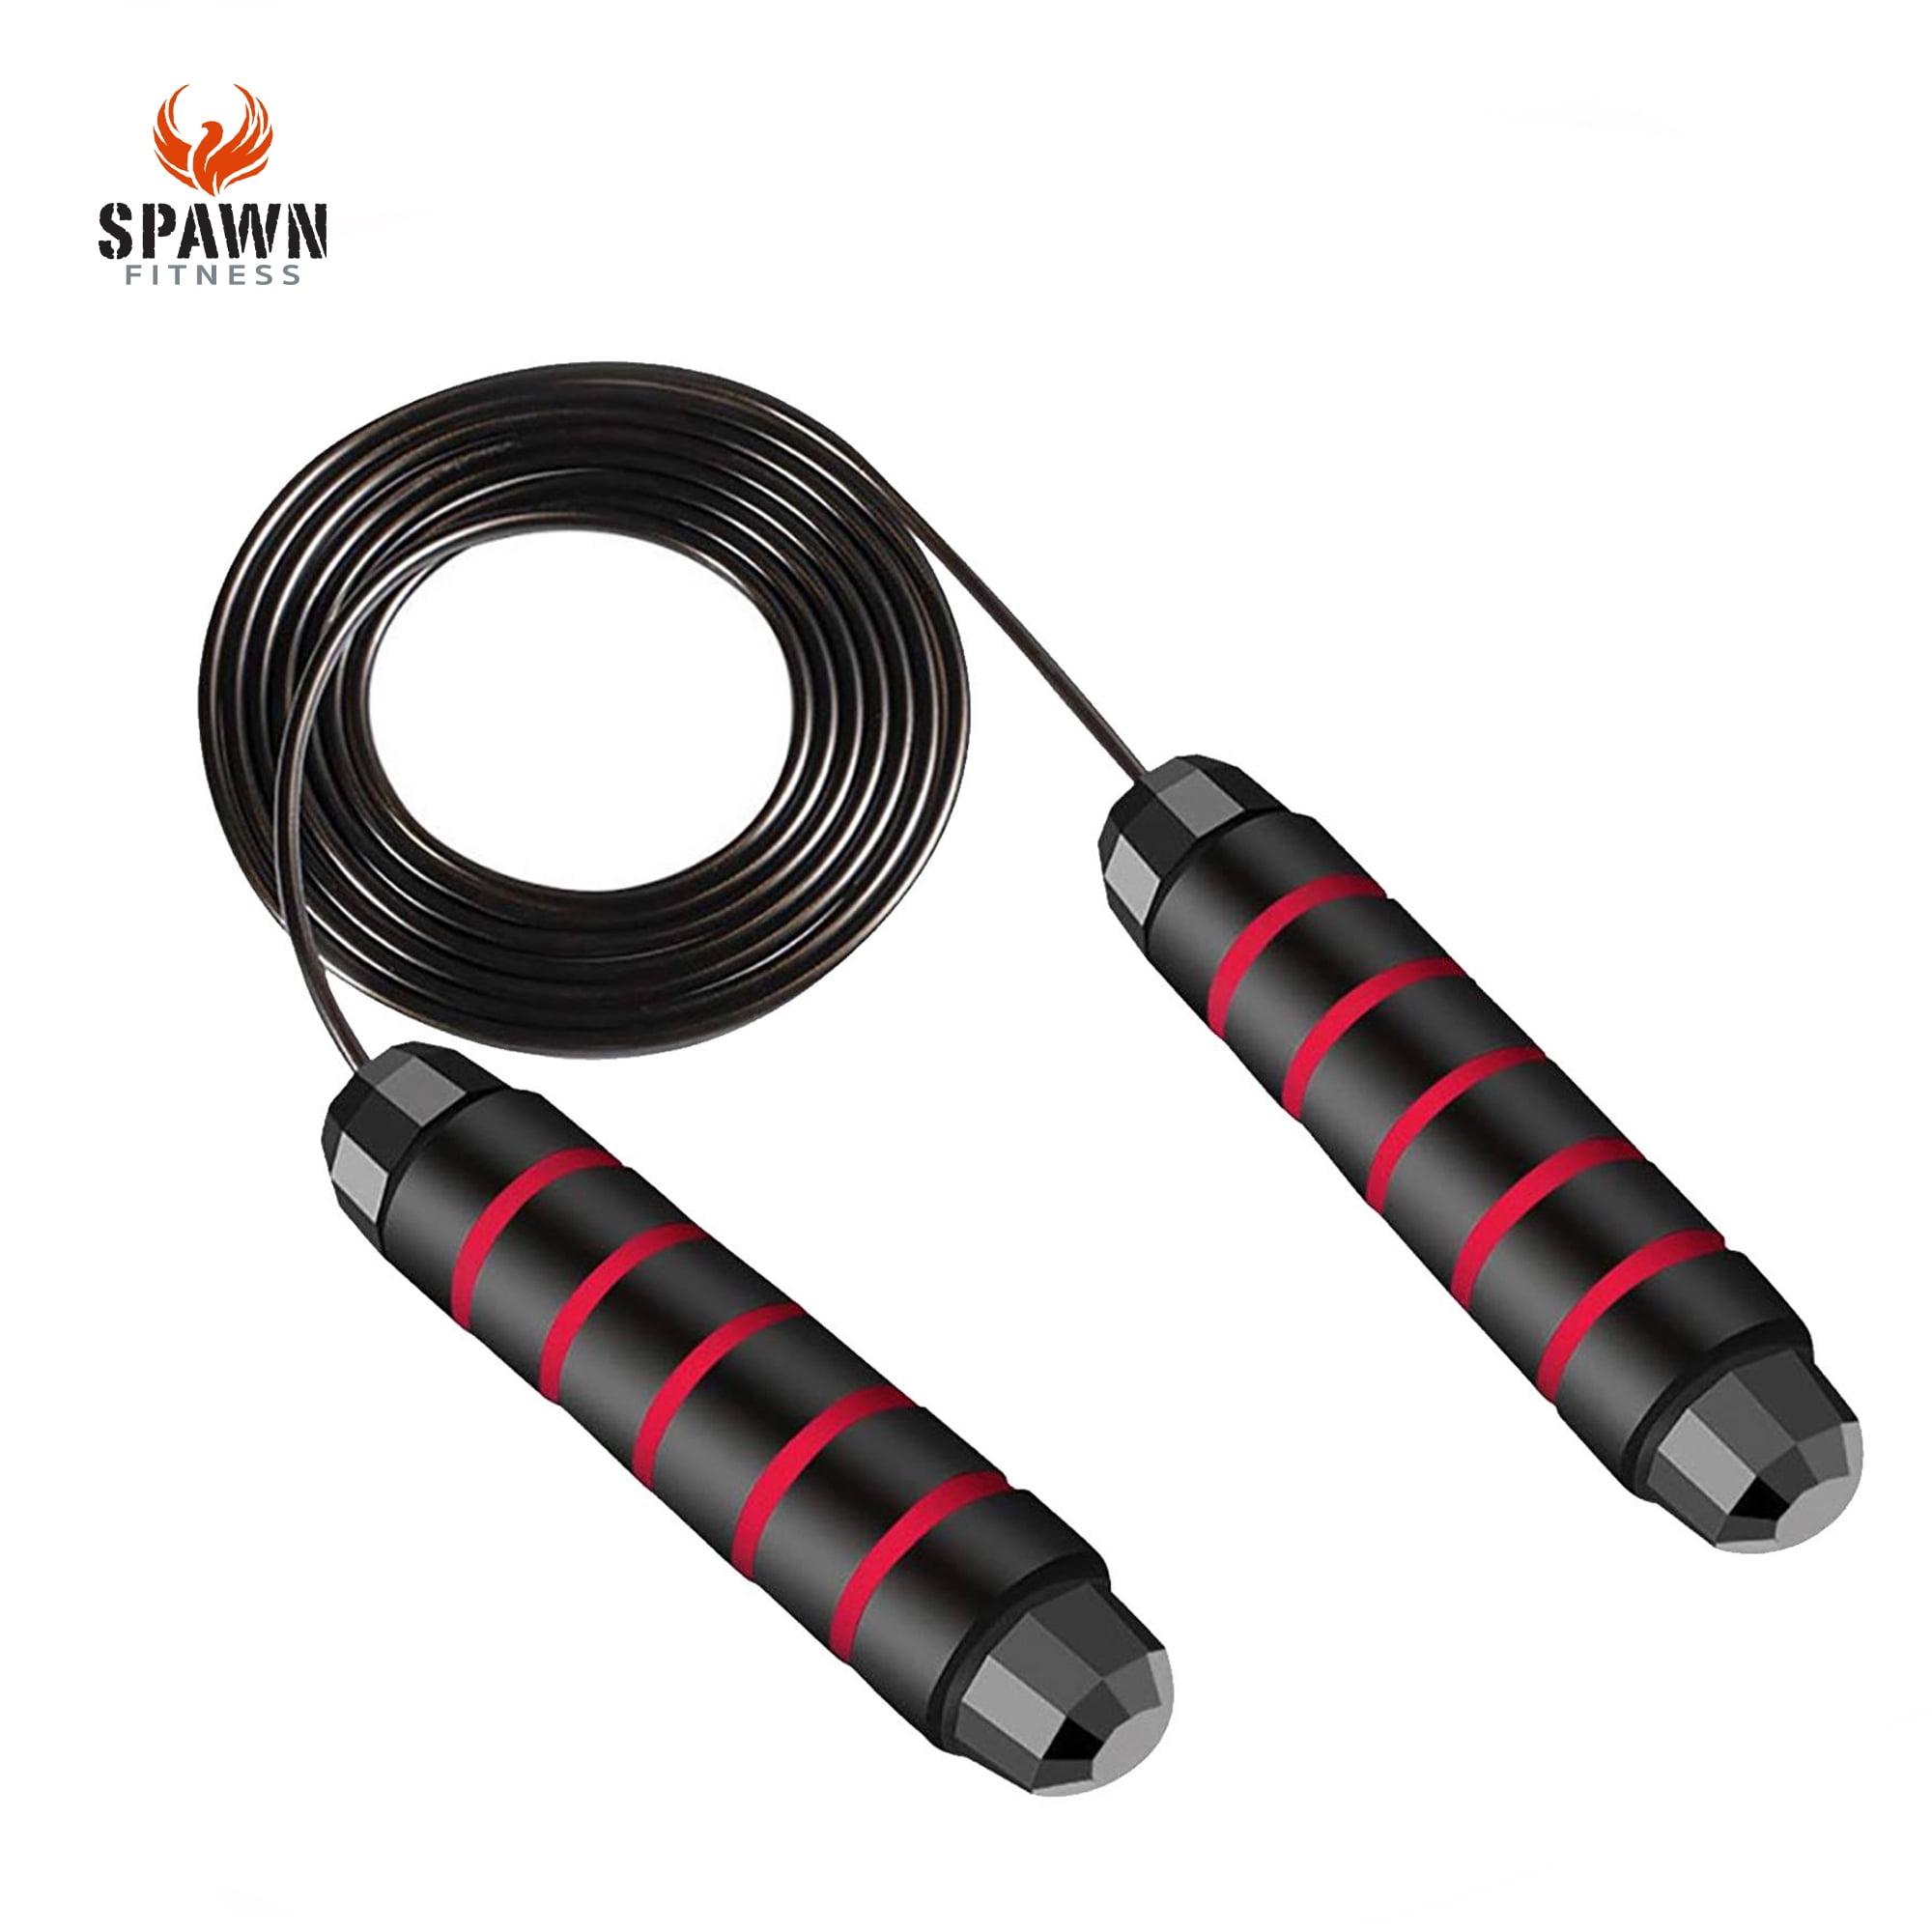 Spawn Fitness Jump Rope Speed Skipping Ropes For Exercise and